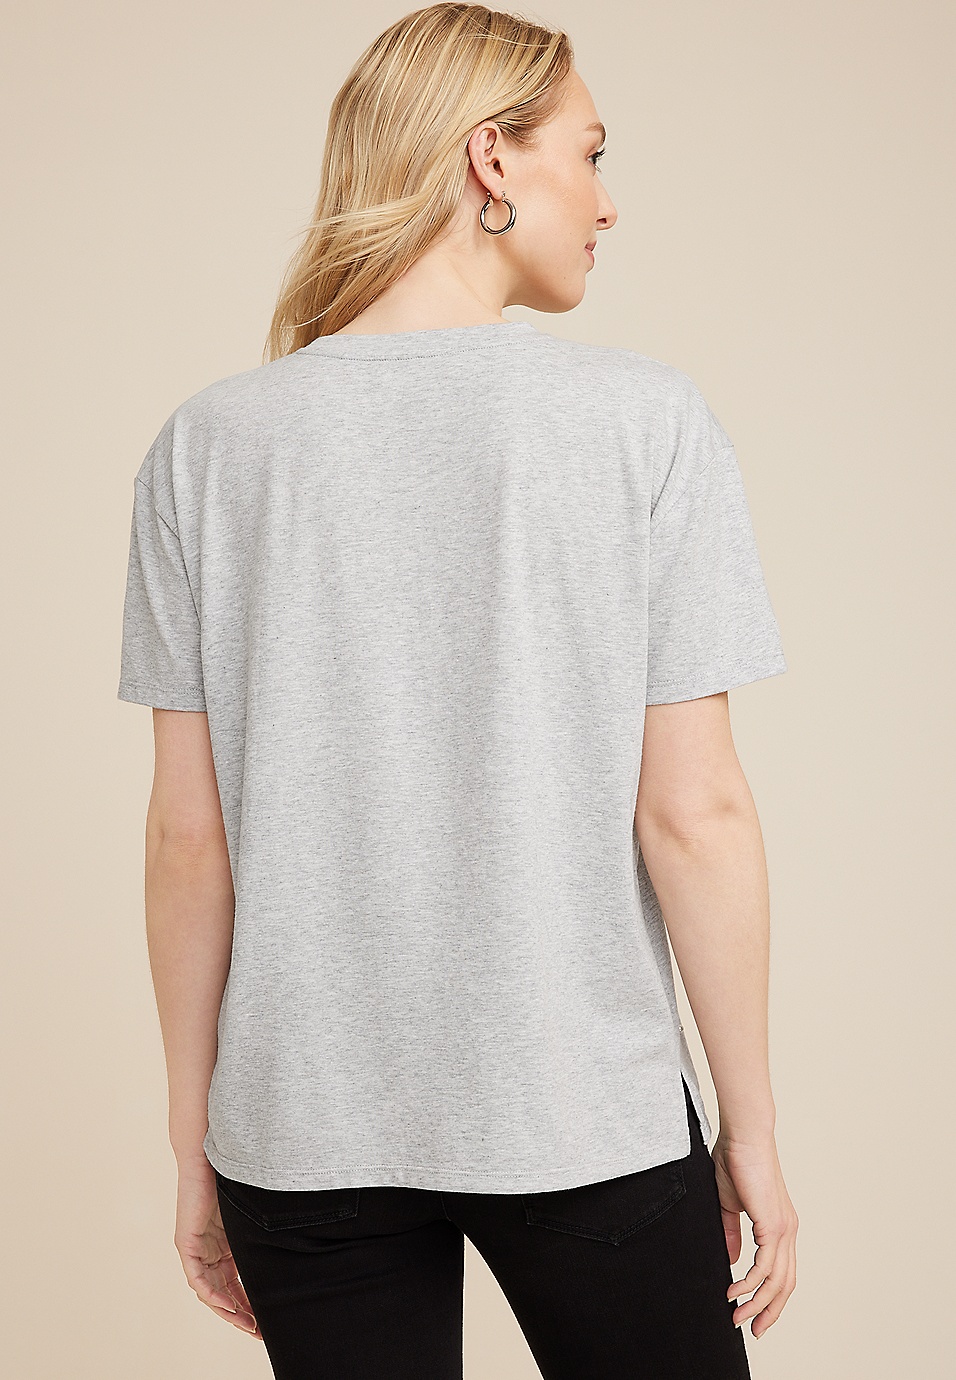 edgely™ Pearl Embellished Crew Tee maurices | Neck